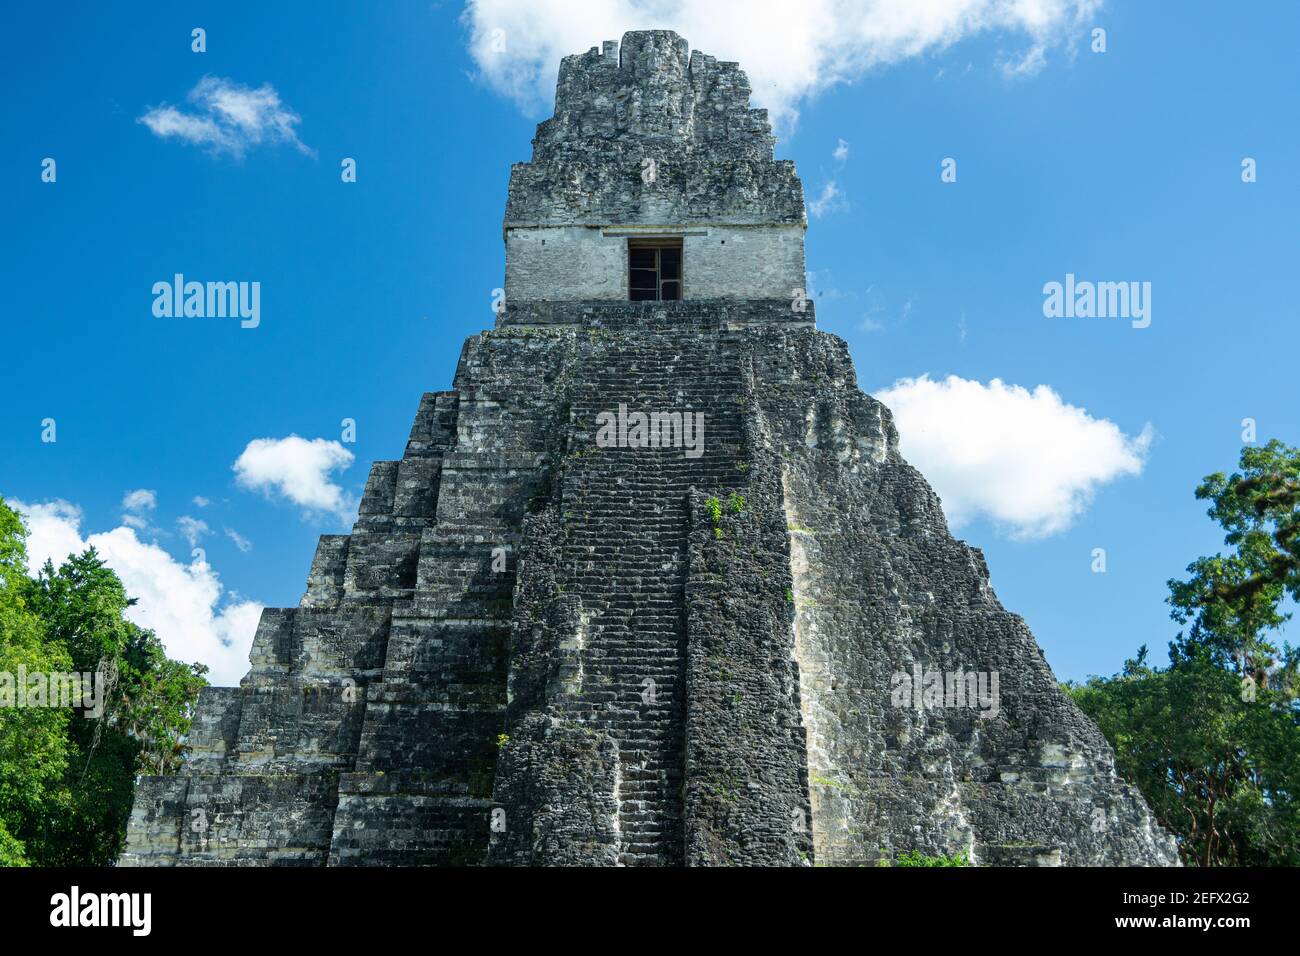 Temple 1 at the Mayan ruins of Tikal, A UNESCO World Heritage site in Peten, Guatemala Stock Photo